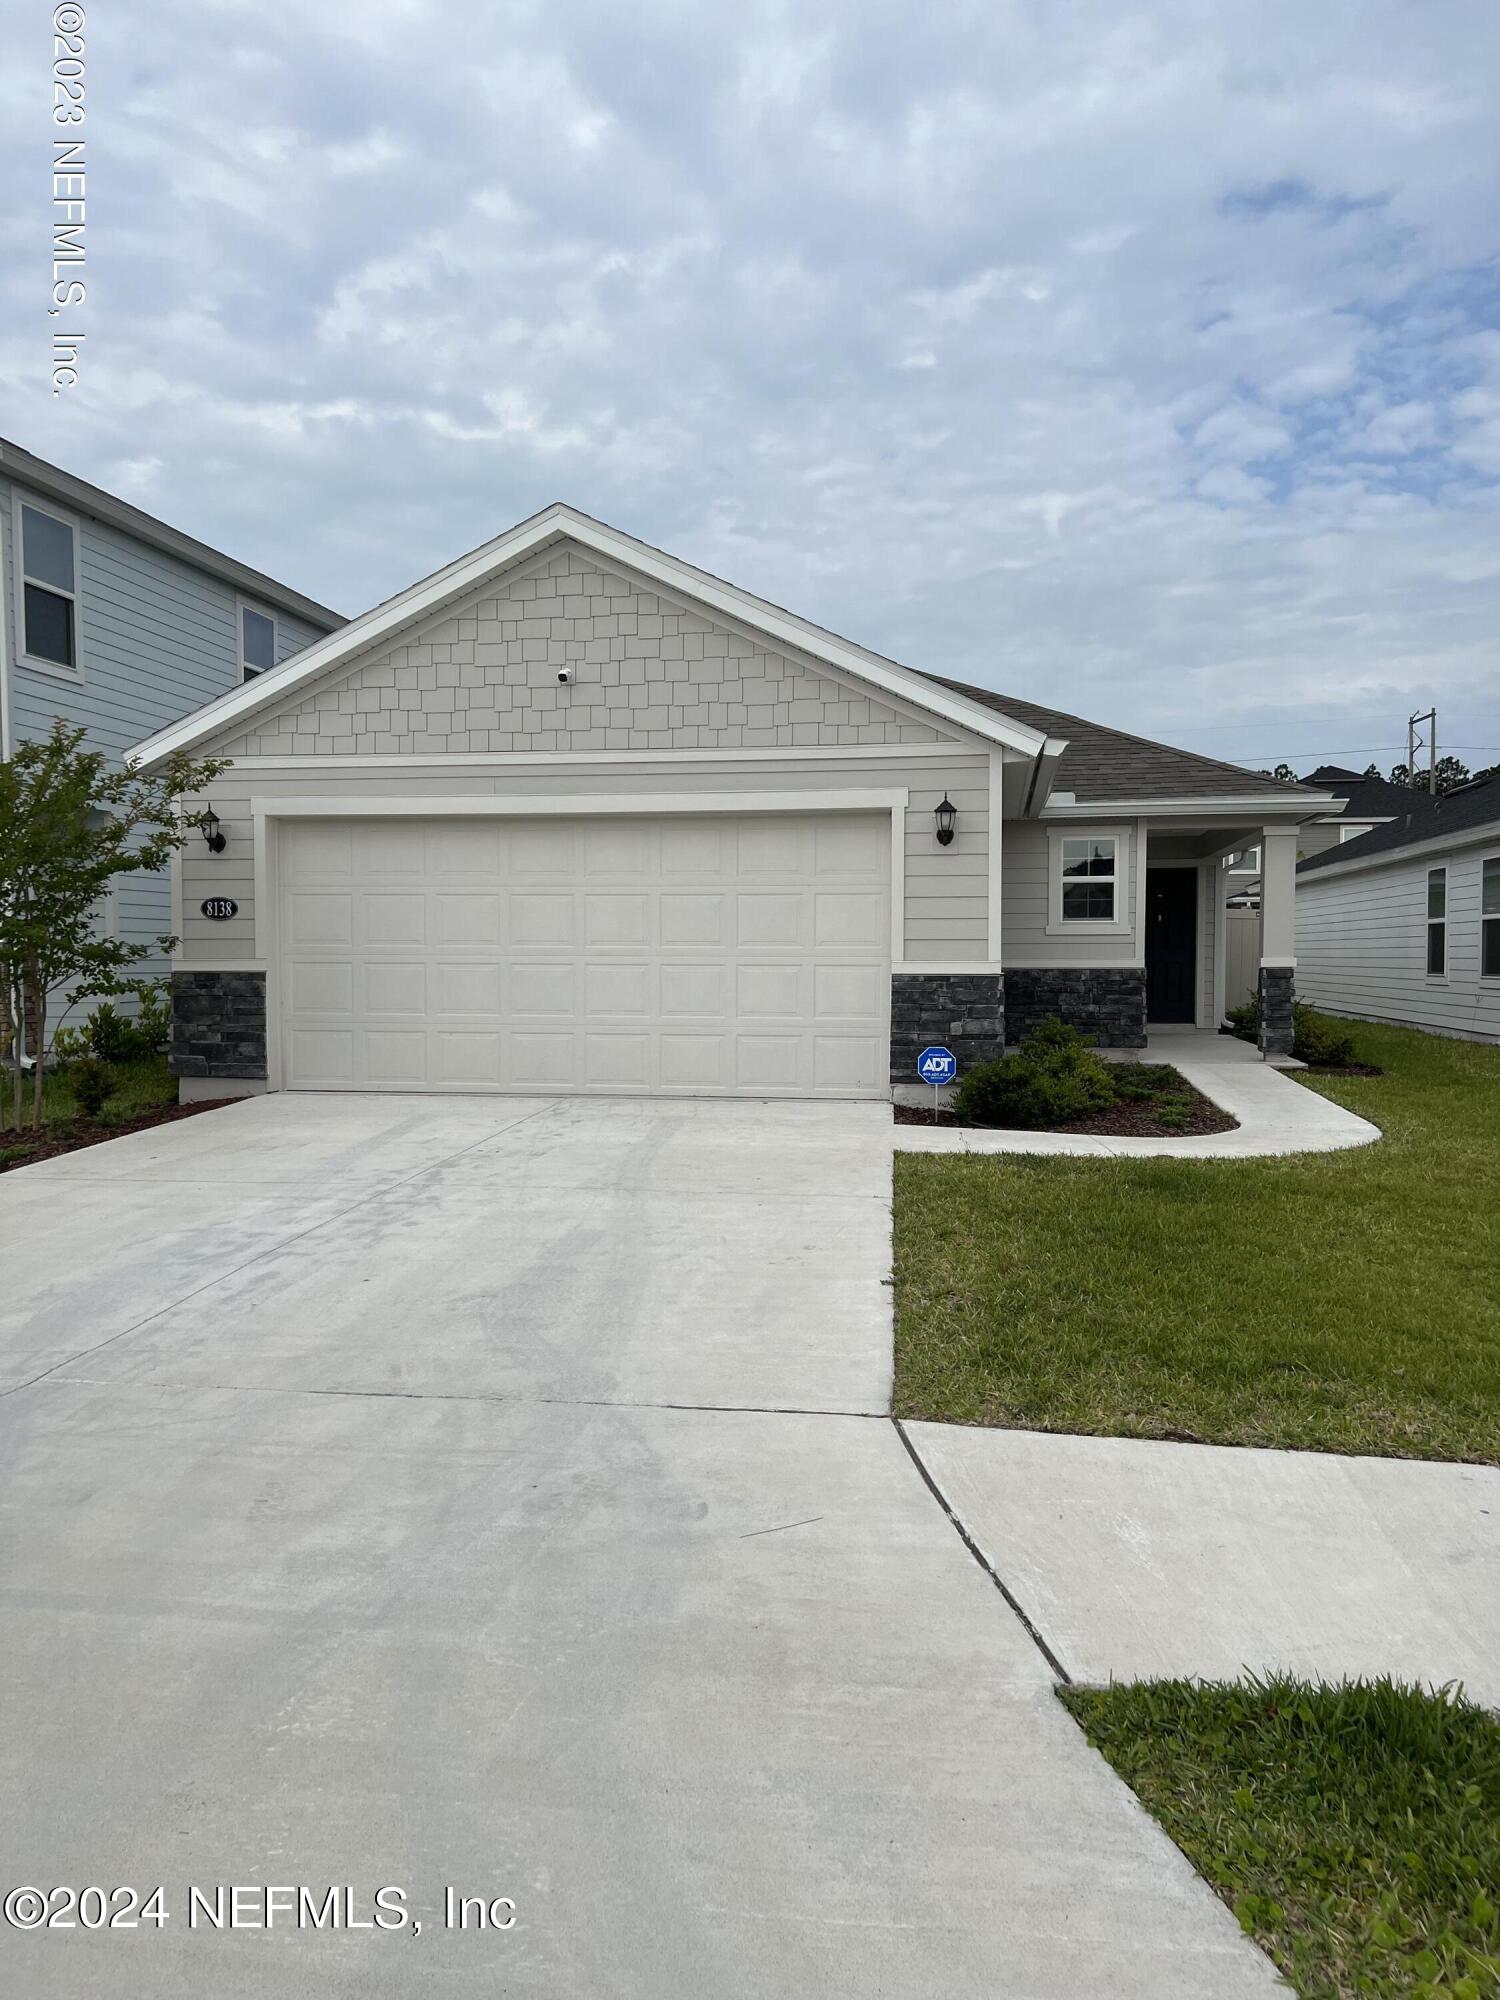 Jacksonville, FL home for sale located at 8138 Lumber Way, Jacksonville, FL 32222